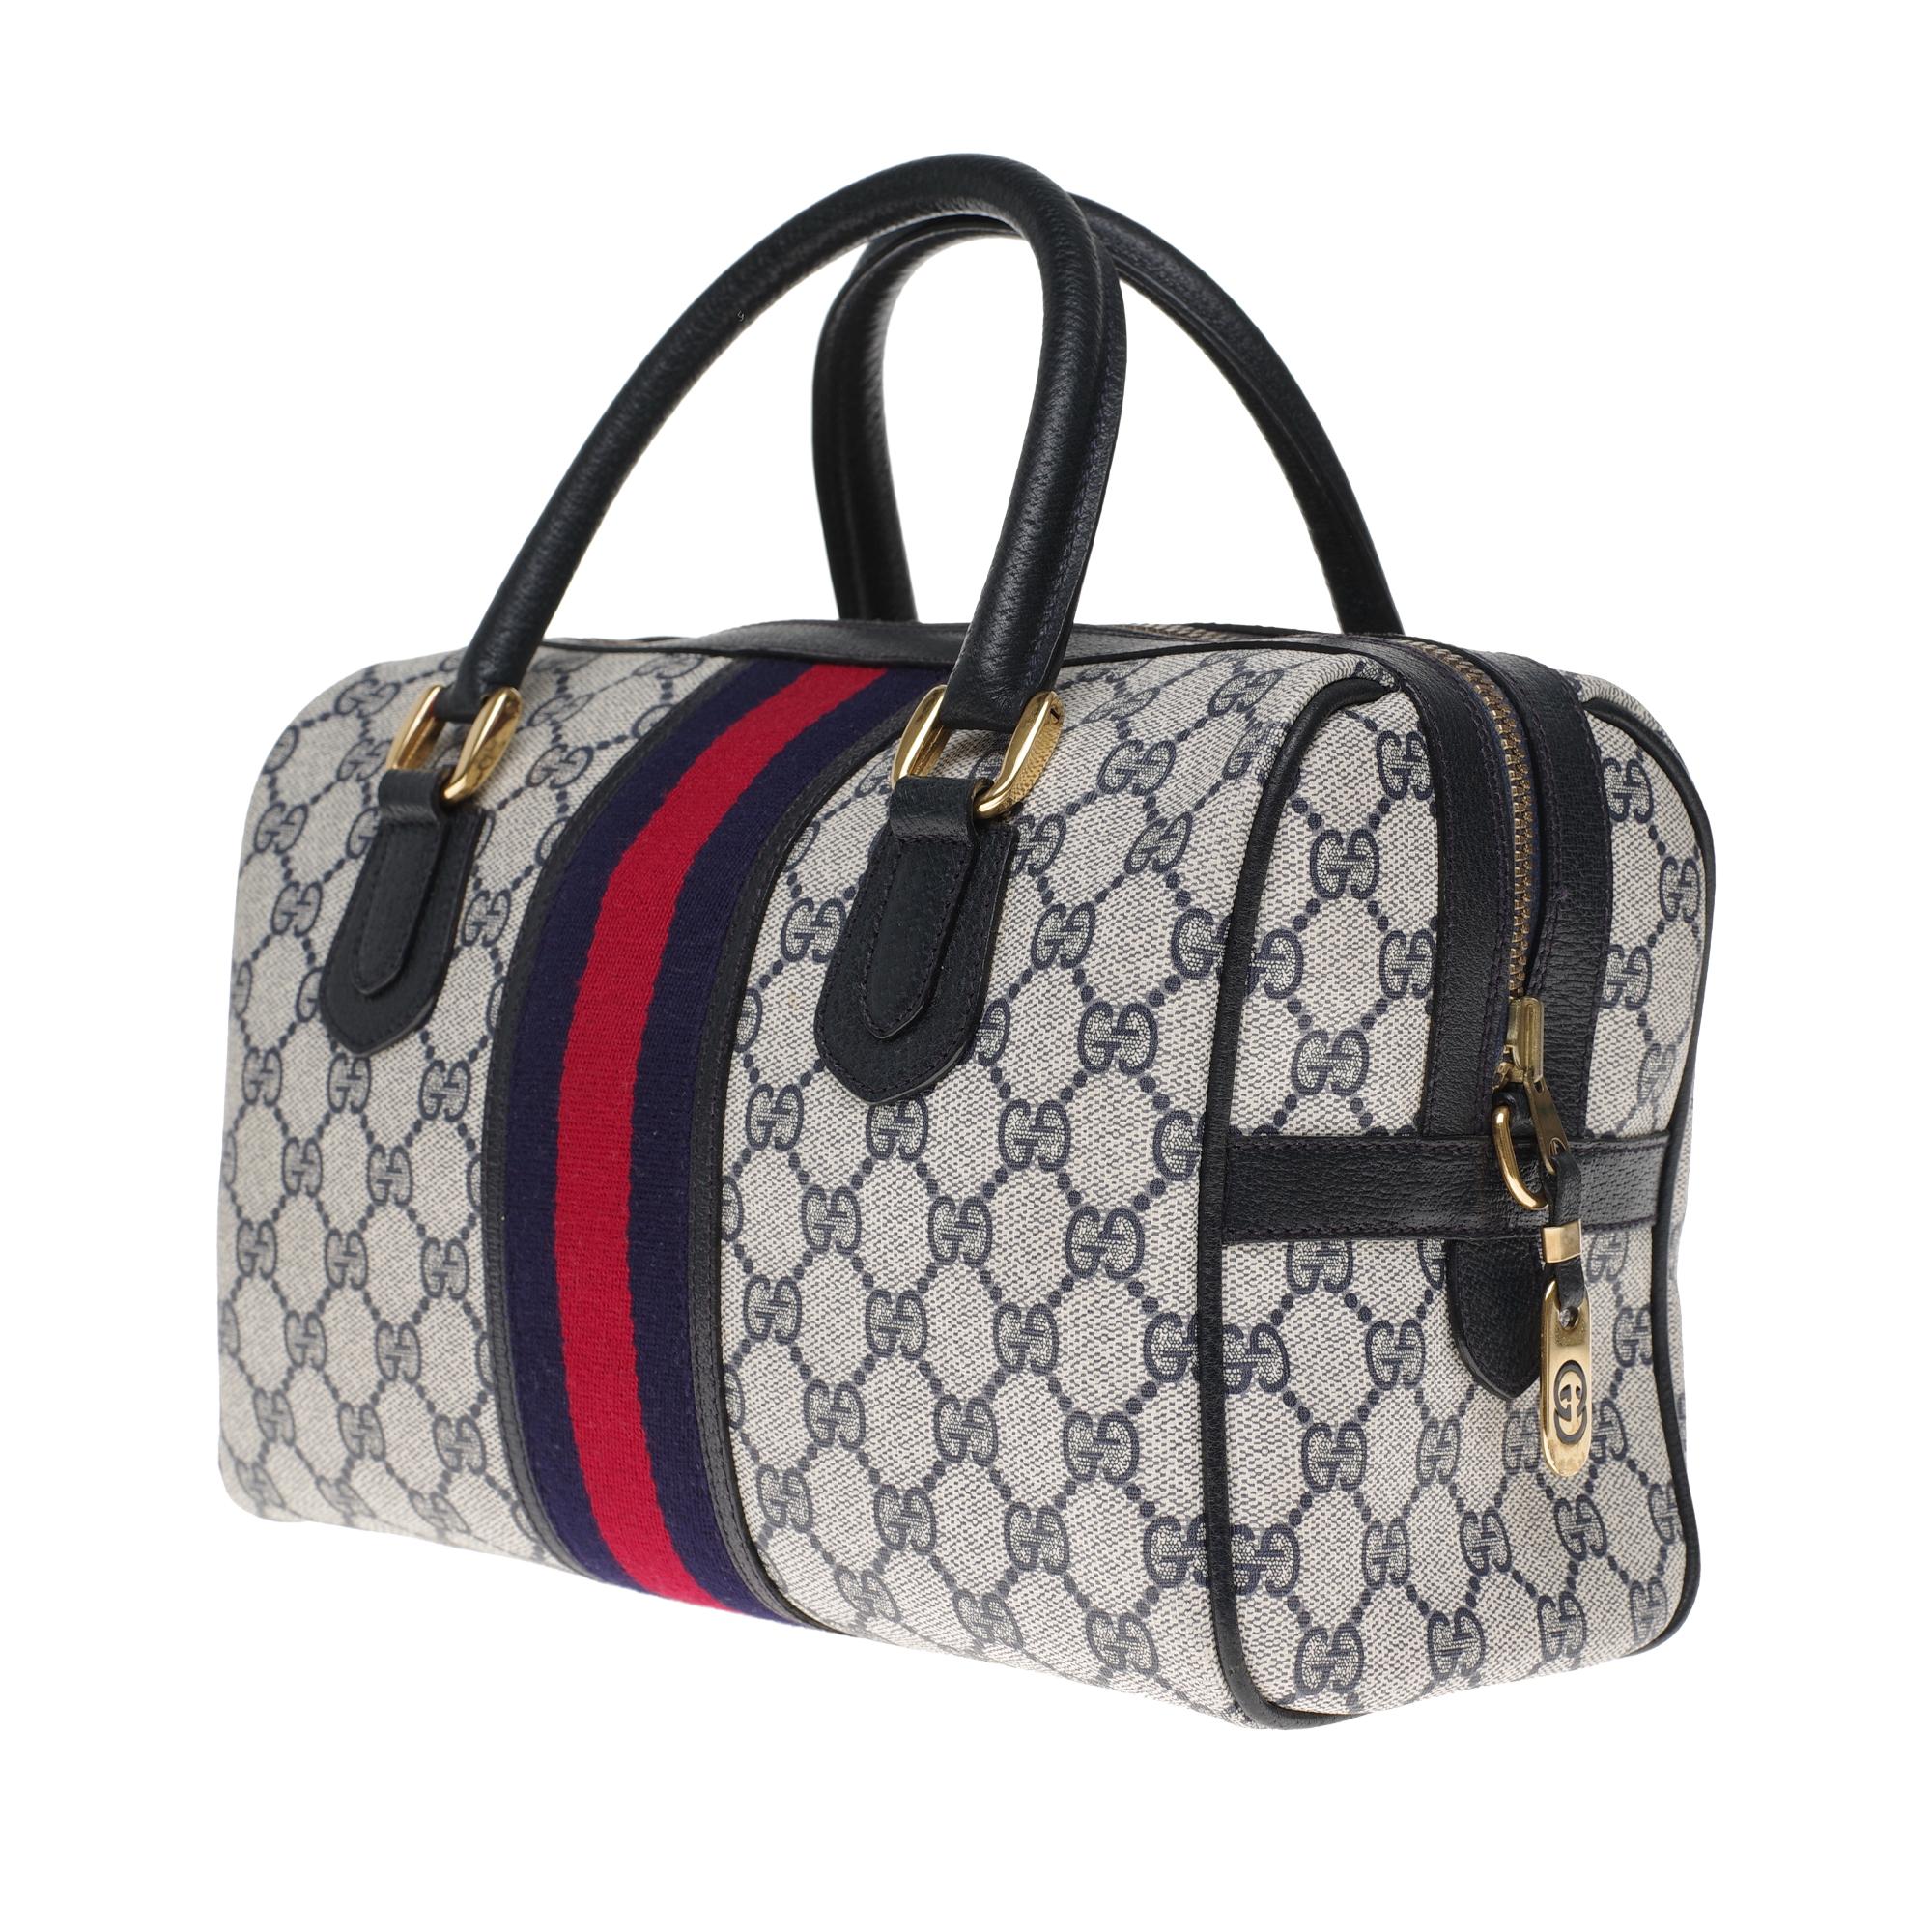 gucci side bag price in nepal